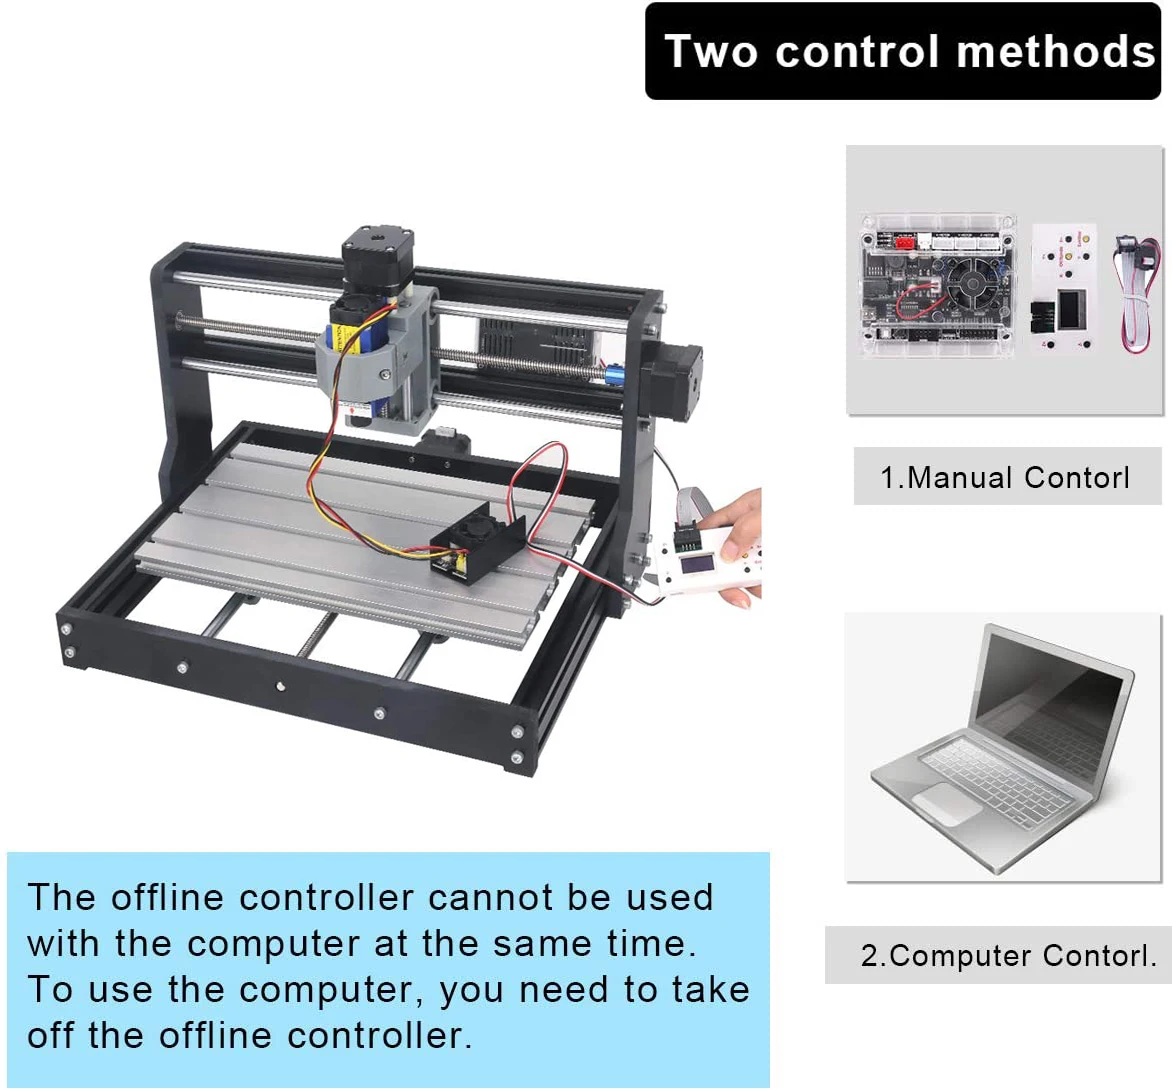 CNC 3018 Pro 10w/15w Laser DIY Mini Milling Machine With GRBL Offline Controller 3 Axis Wood Router PCB Milling Cutting Engraver enlarge